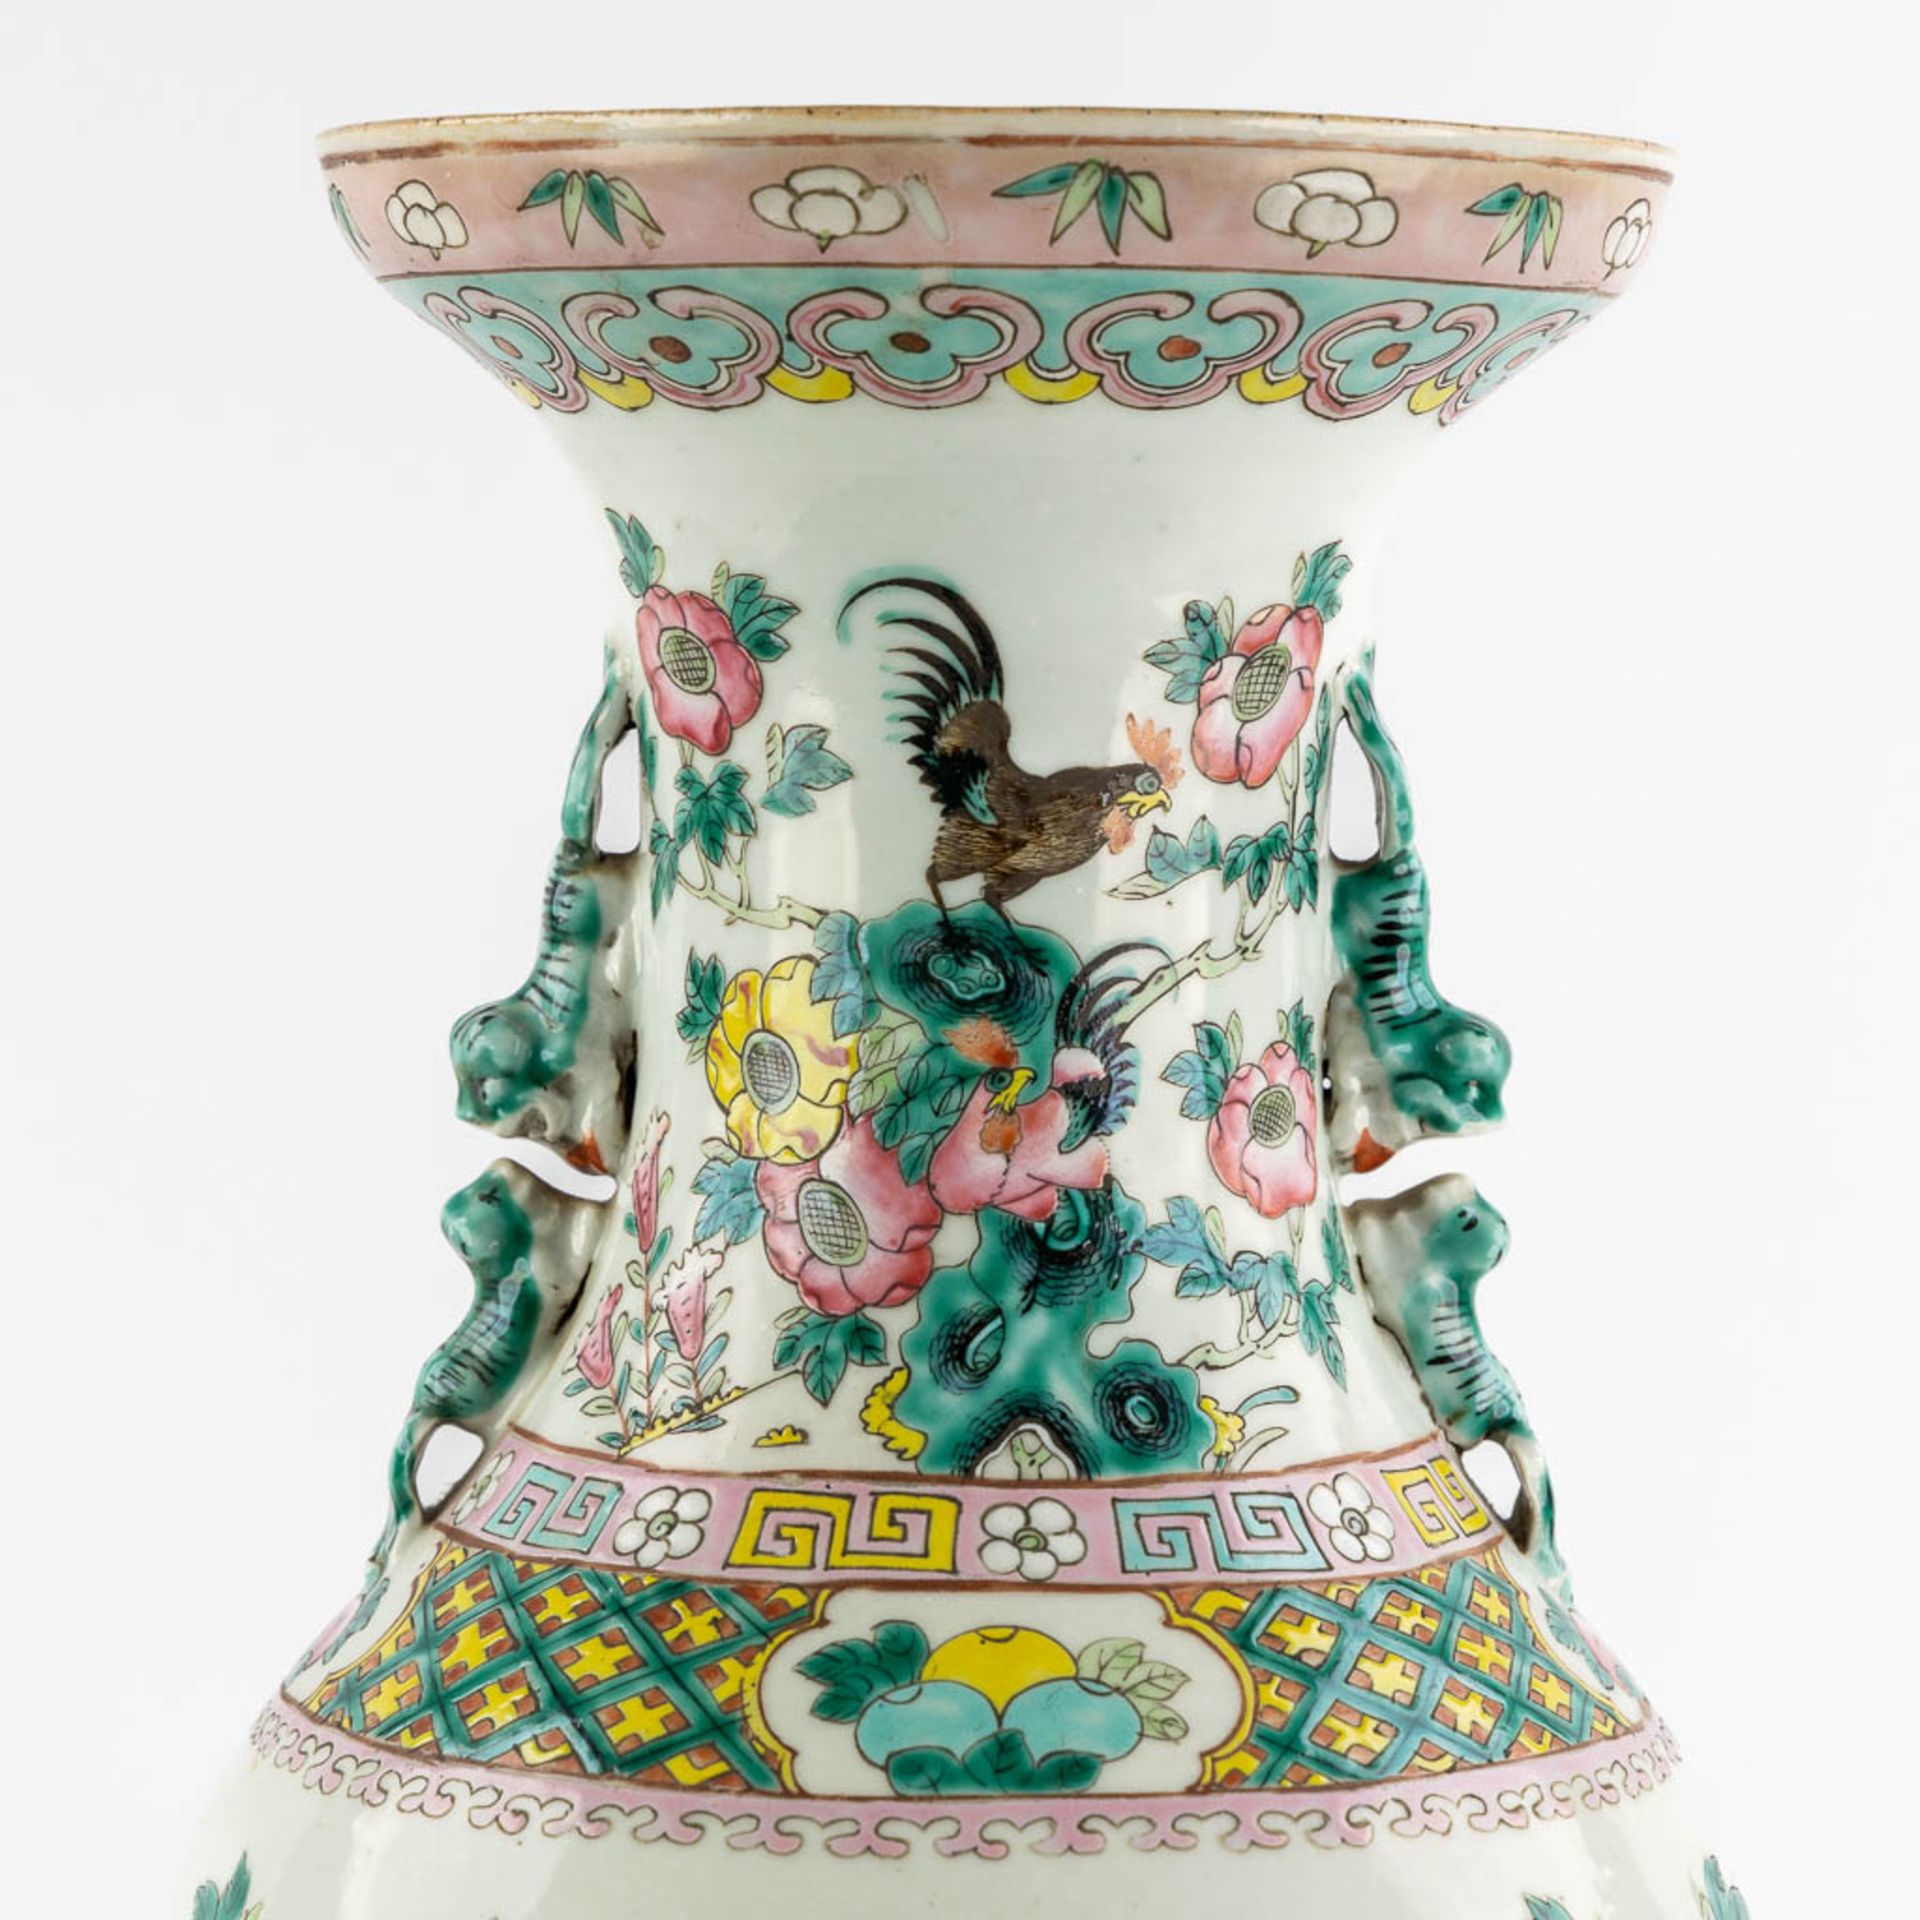 A large Chinese Famille Rose vase decorated with Chicken and Flora. (H:59 x D:23 cm) - Image 9 of 11